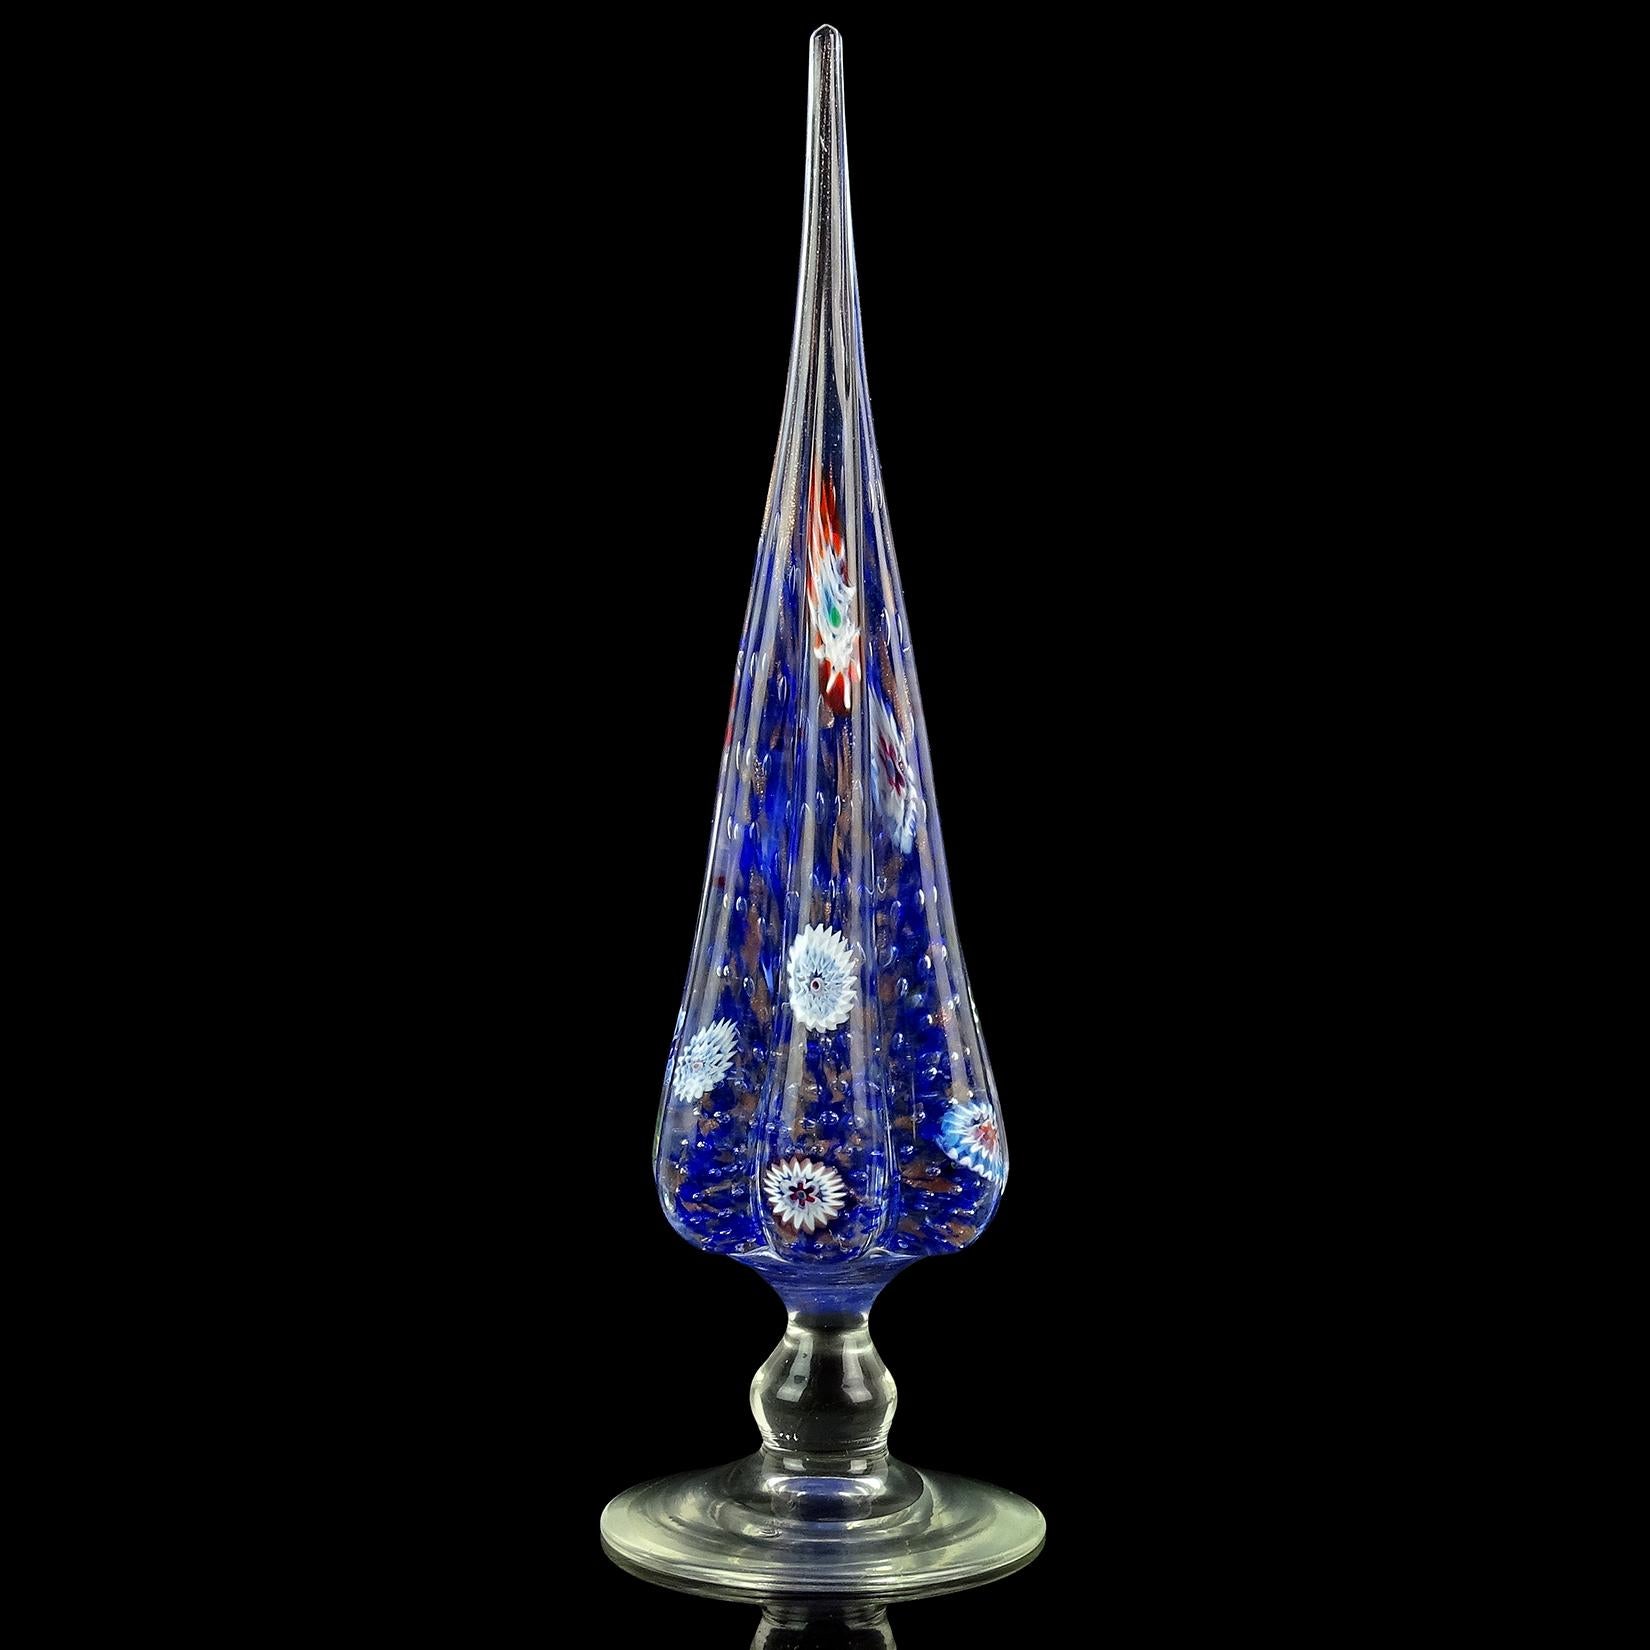 Beautiful vintage Murano hand blown millefiori flower murrines Italian art glass Christmas tree sculpture. Documented to the Fratelli Toso company. It is made with controlled bubbles, cobalt blue dots and copper aventurine flecks. The tree has many